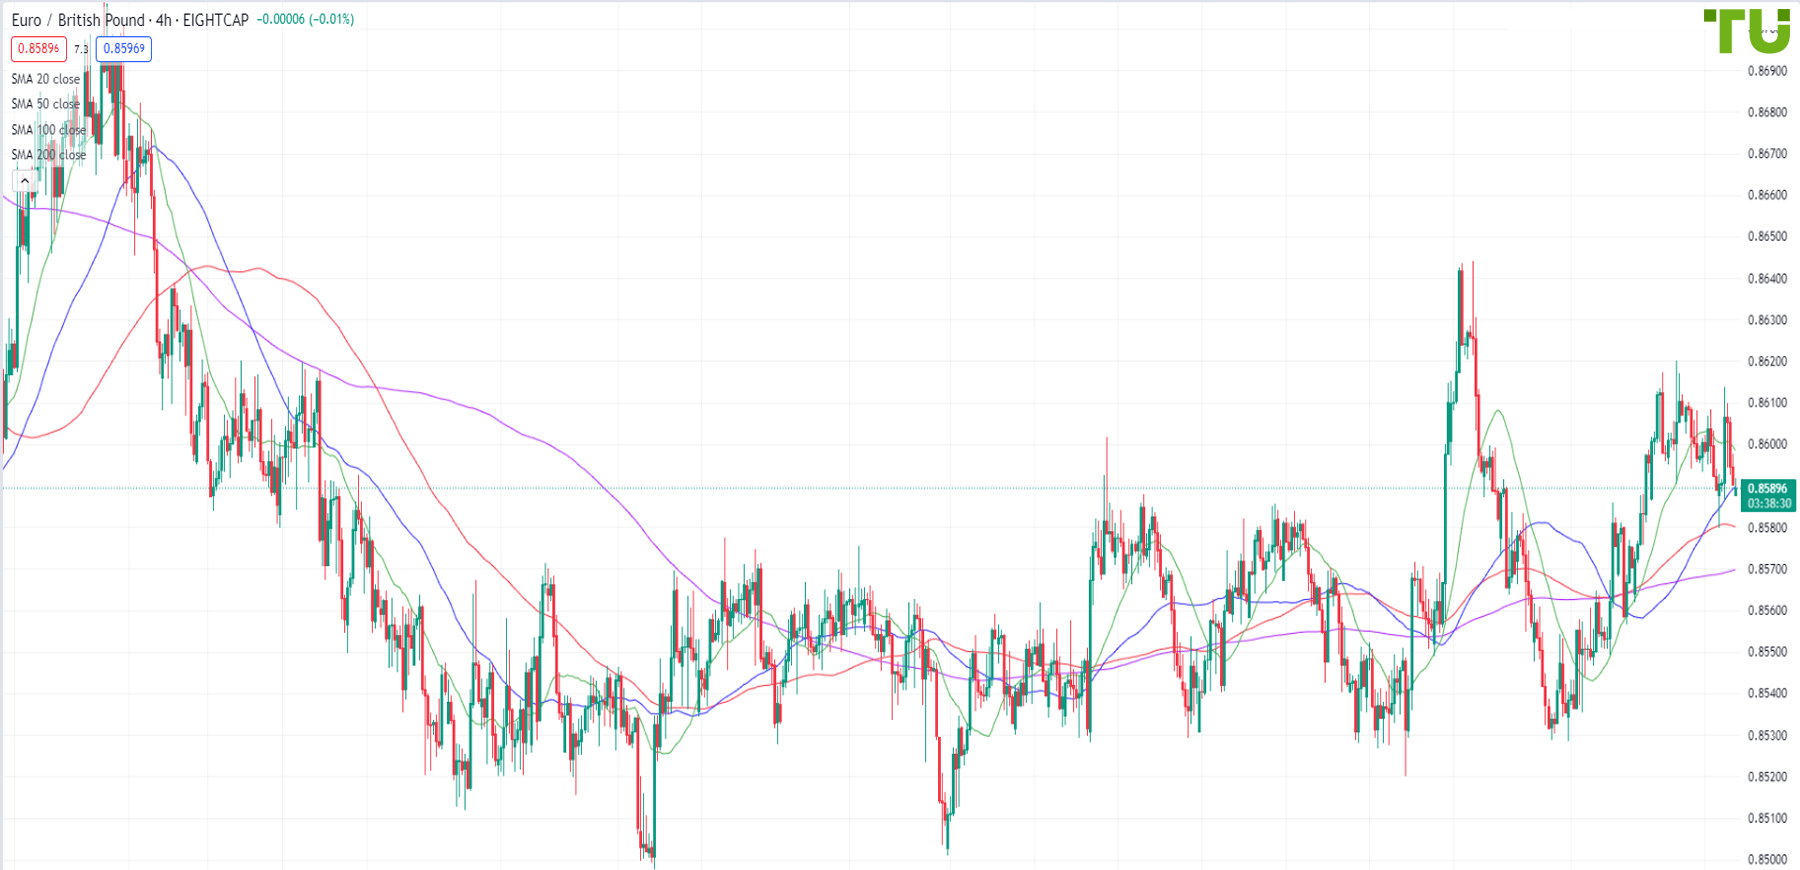 EUR/GBP is being sold on the rise